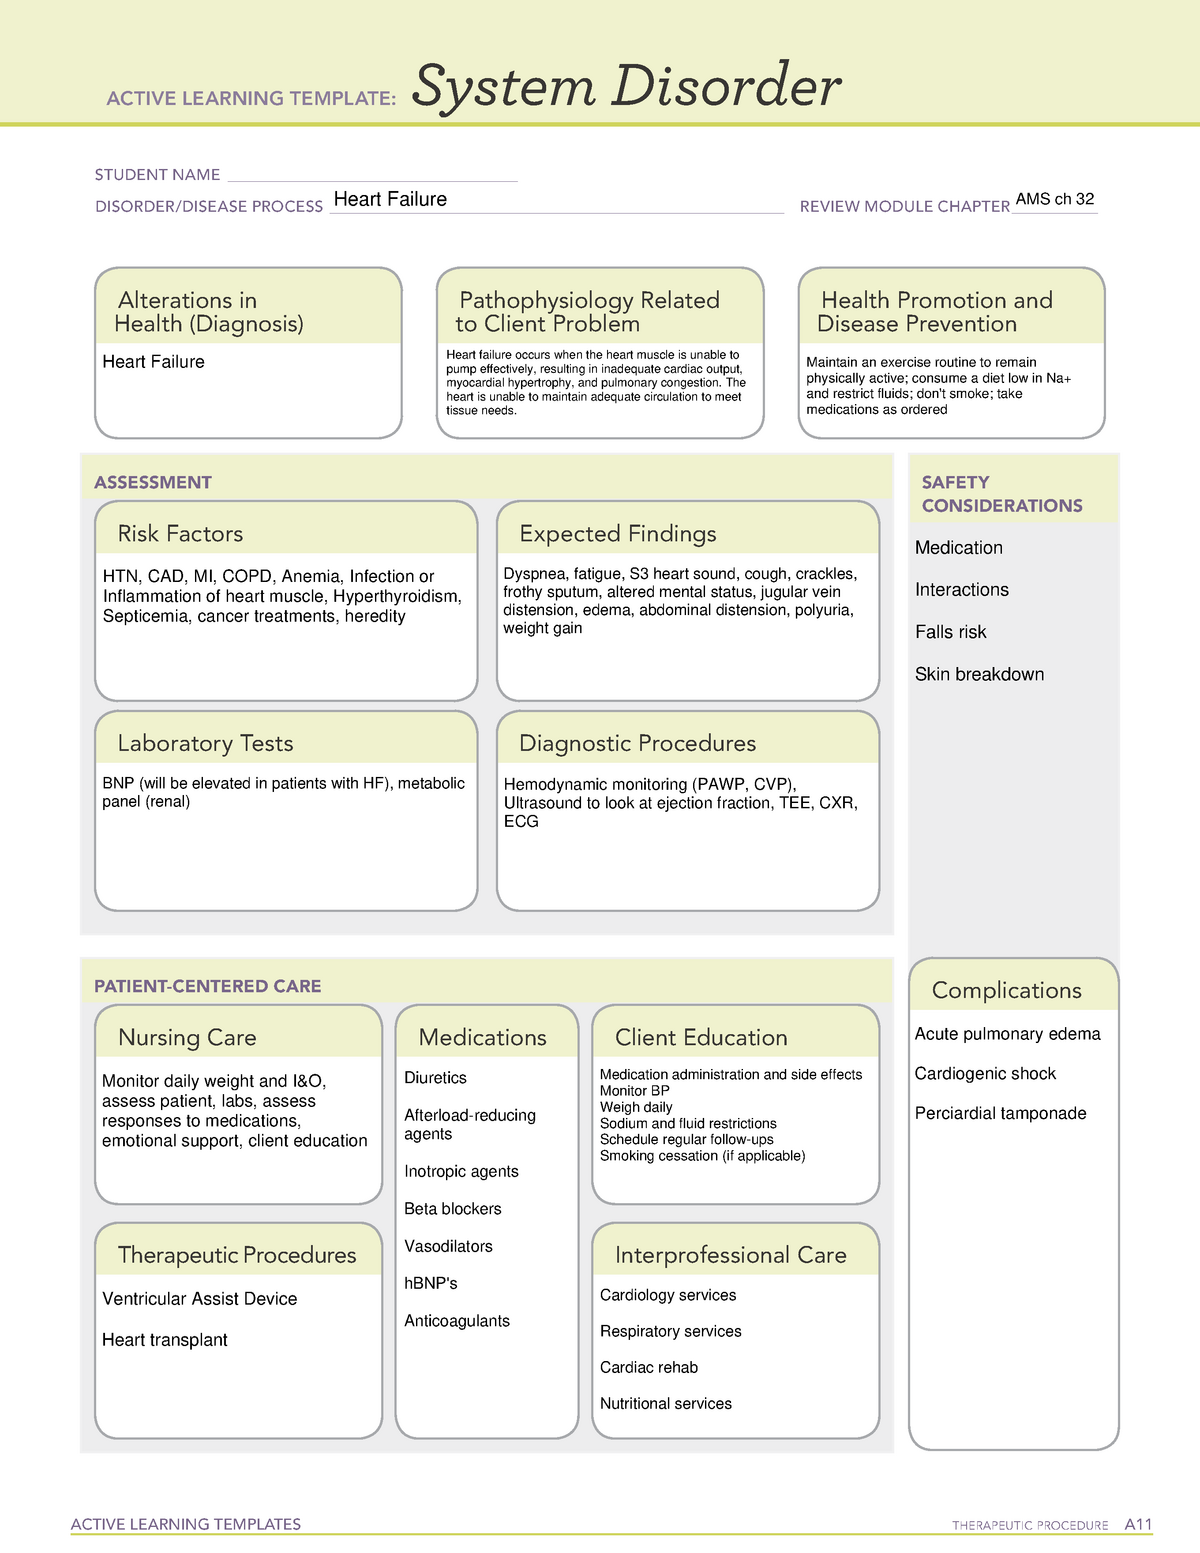 System-disorder-alt complete-2016 - ACTIVE LEARNING TEMPLATES ...